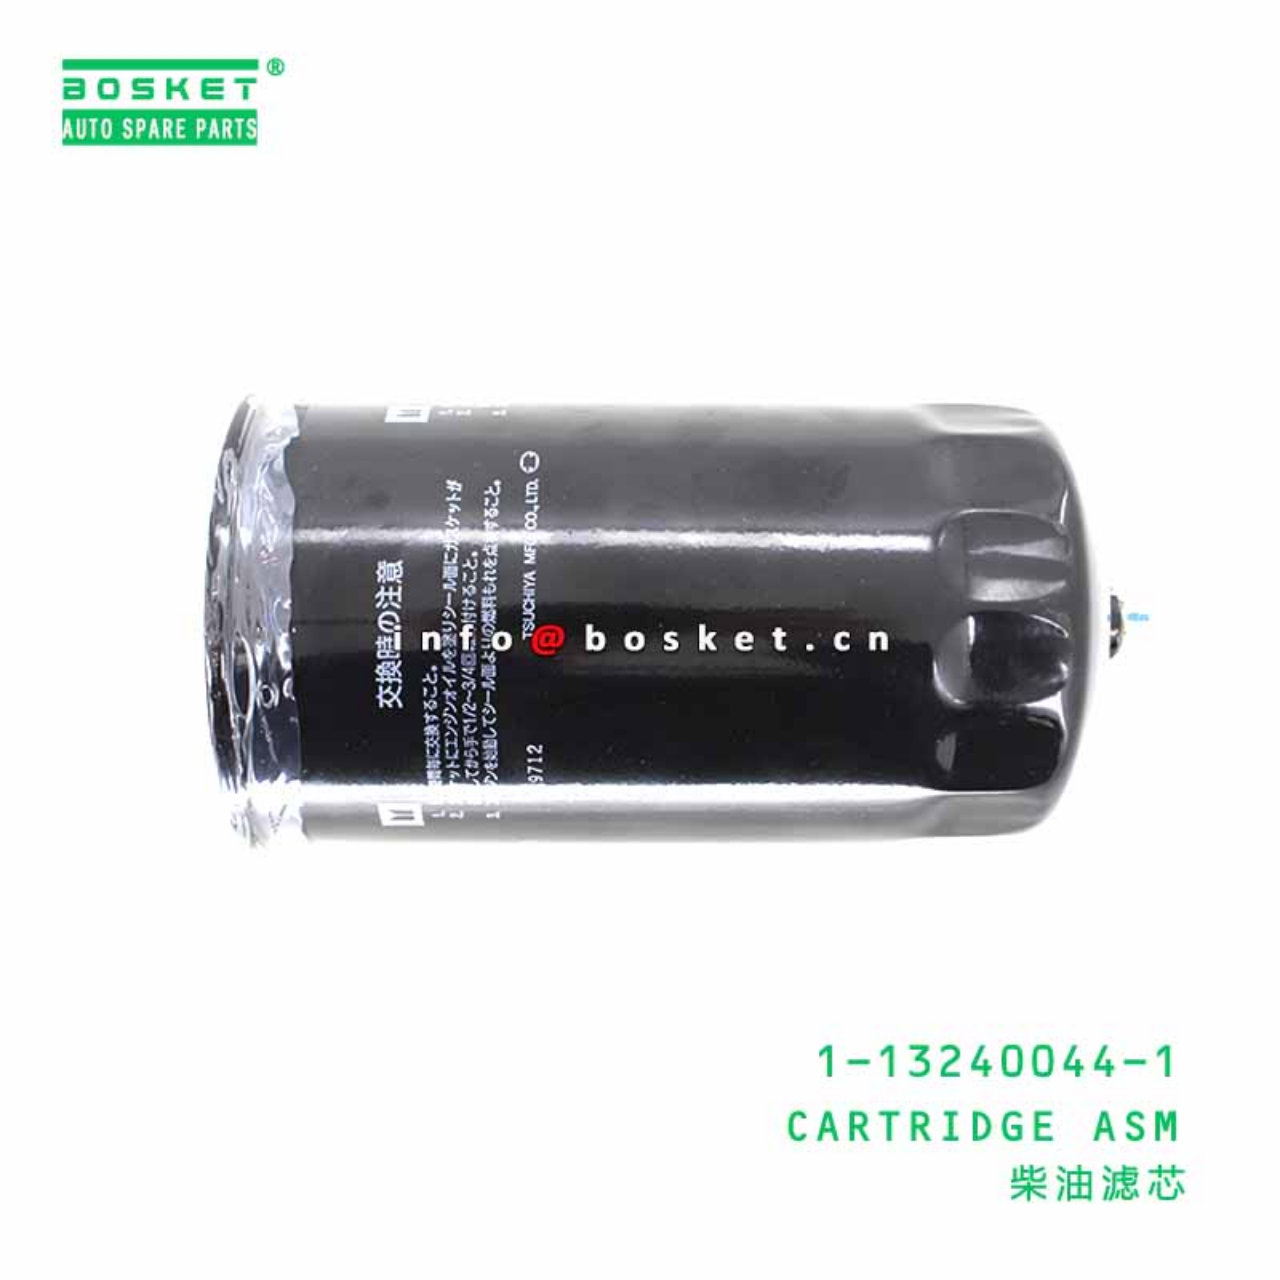 1-13240044-1 1132400441 CARTRIDGE ASSEMBLY Suitable For ISUZU FVR23 6SD1 6RB1